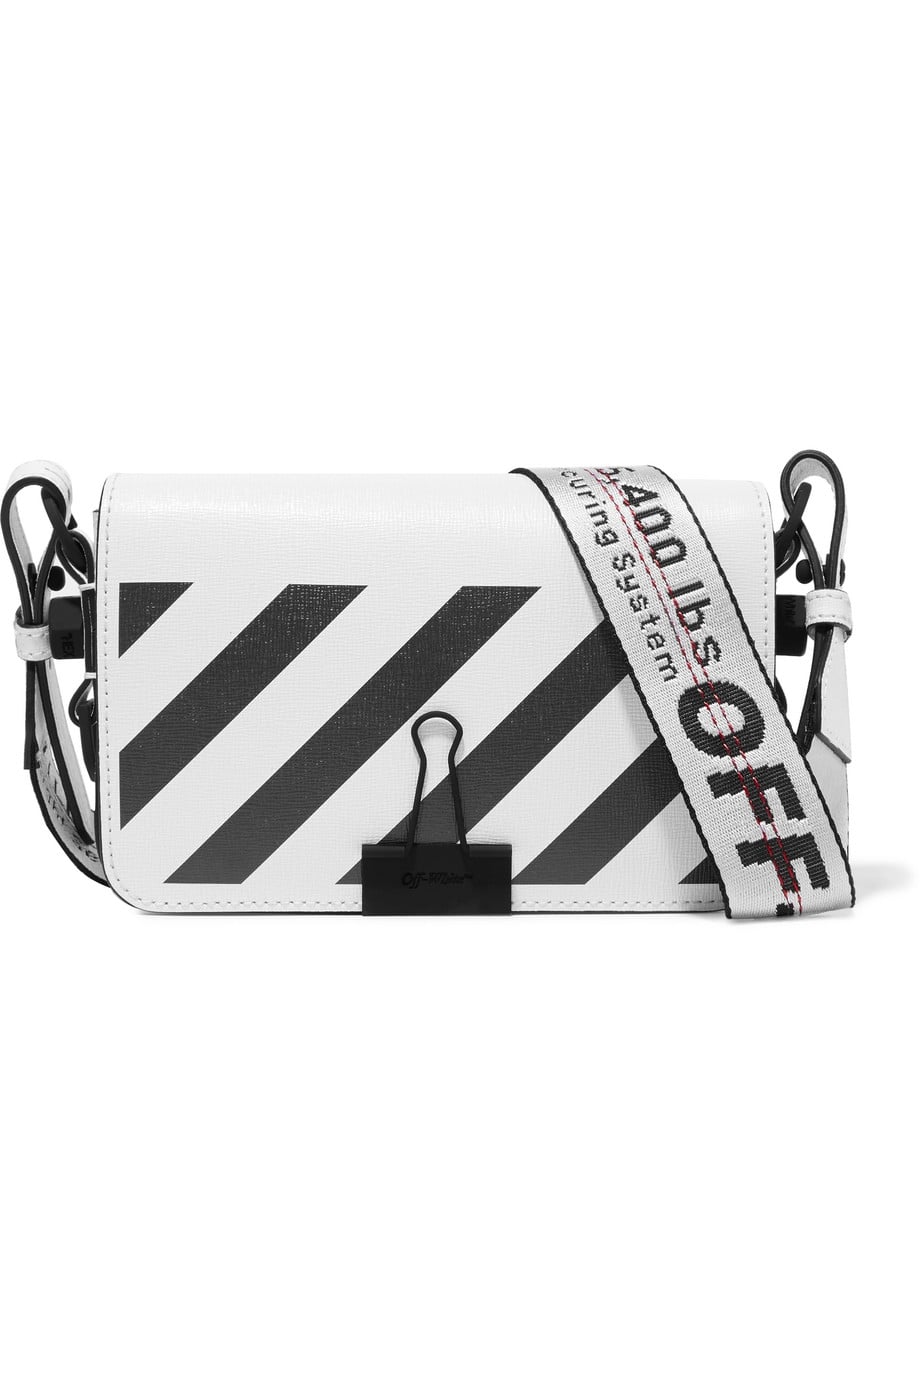 Off-White striped textured shoulder bag ($1,230) ❤ liked on Polyvore  featuring bags, handbags, shoulder bags…